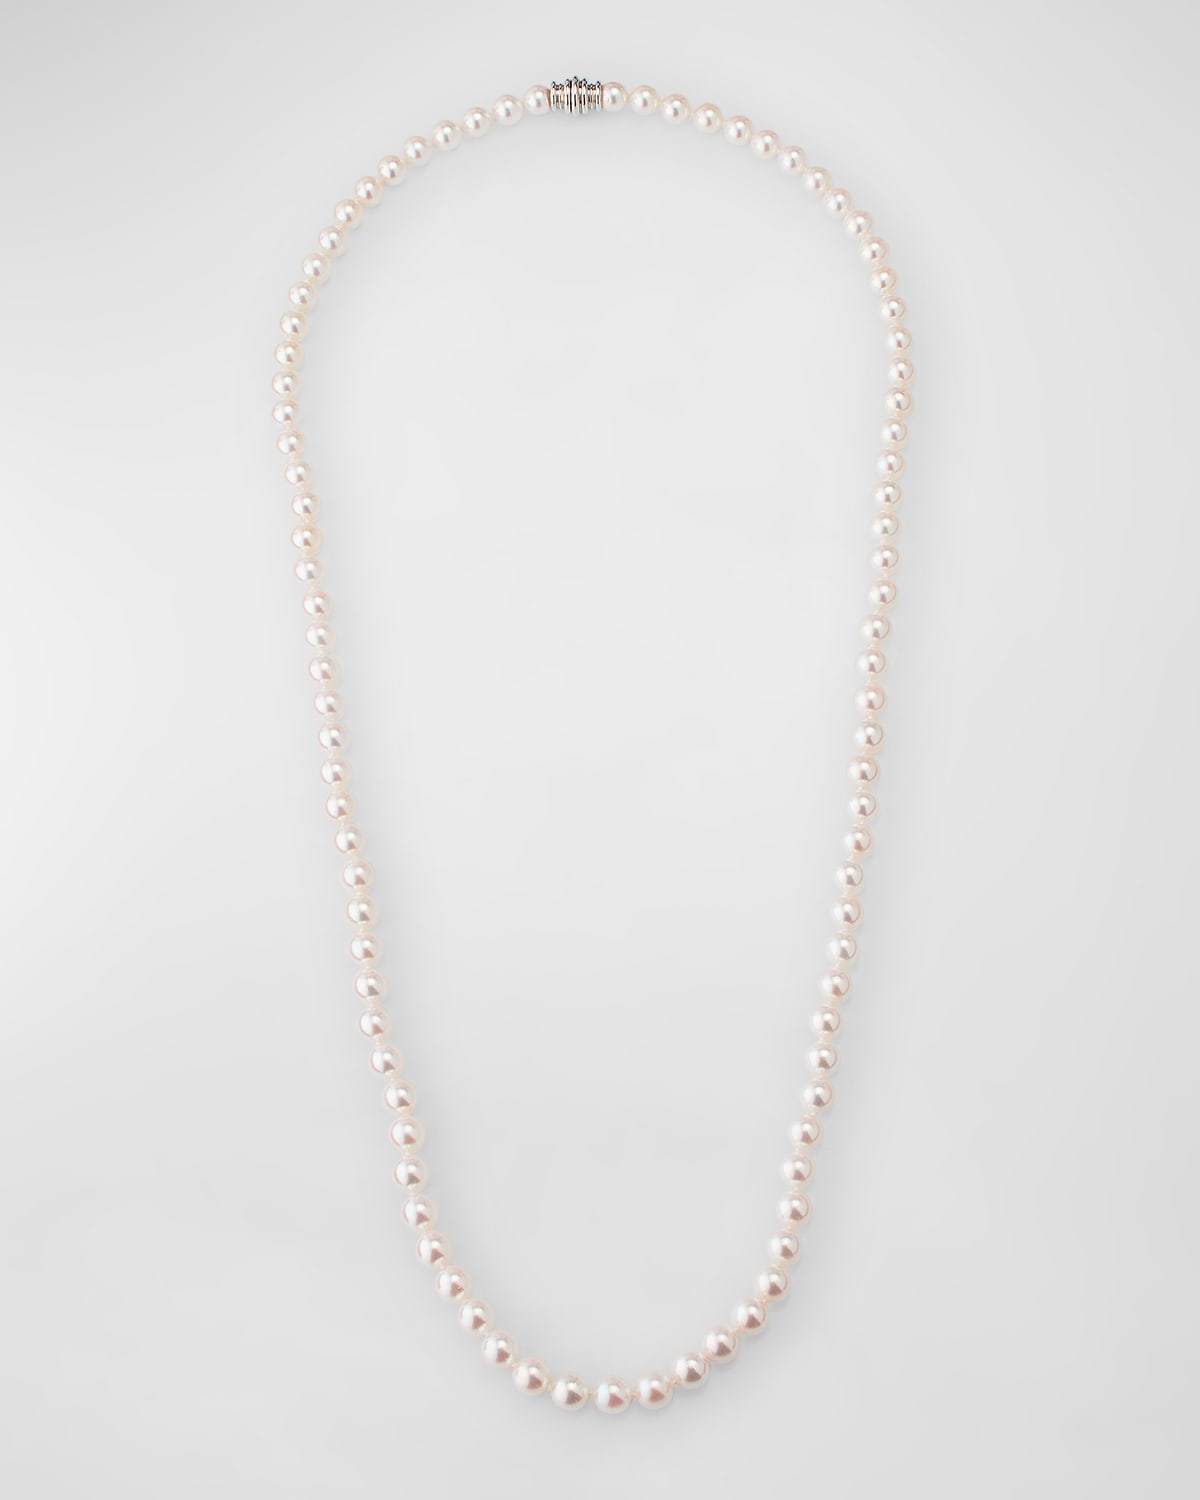 Assael 18k White Gold Akoya Cultured Pearl Necklace In Akoya Pearl